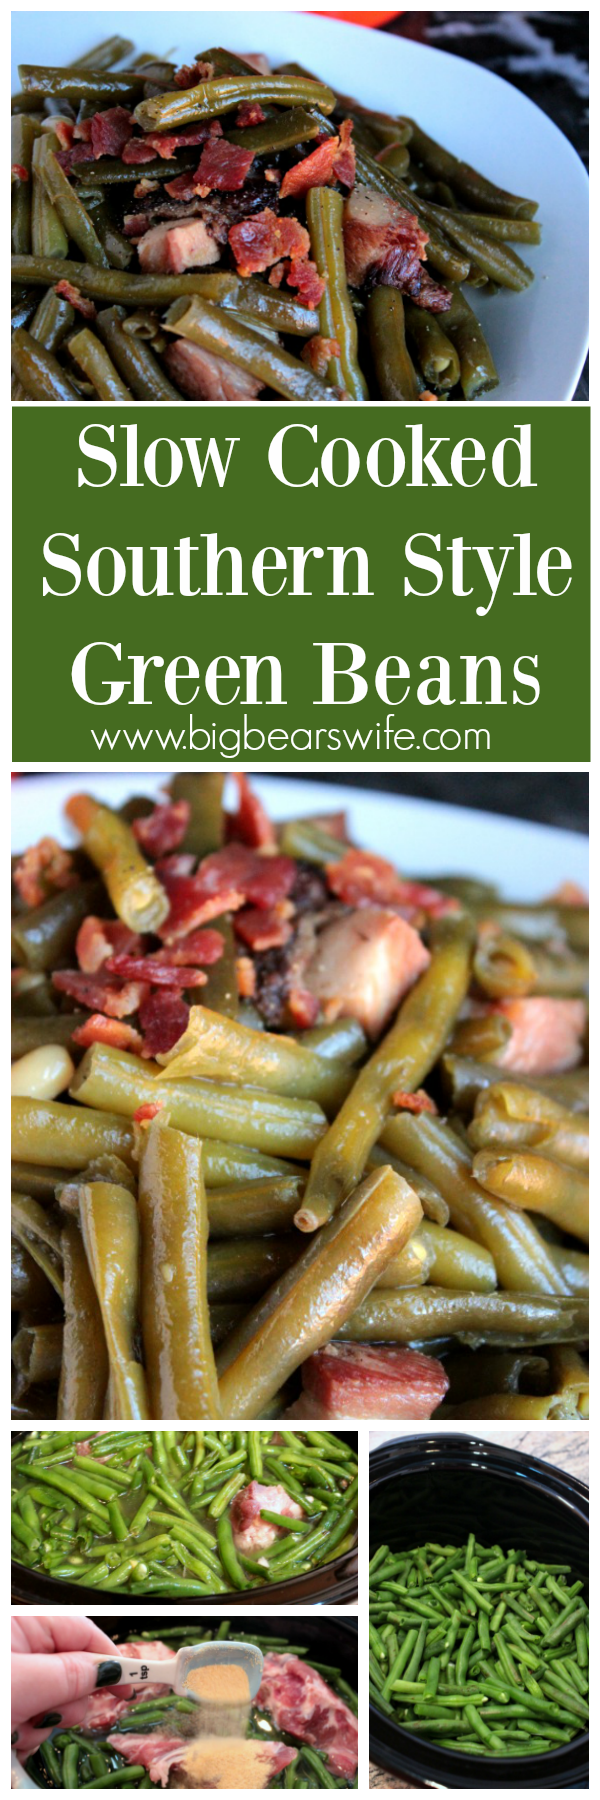 Slow Cooked Southern Style Green Beans